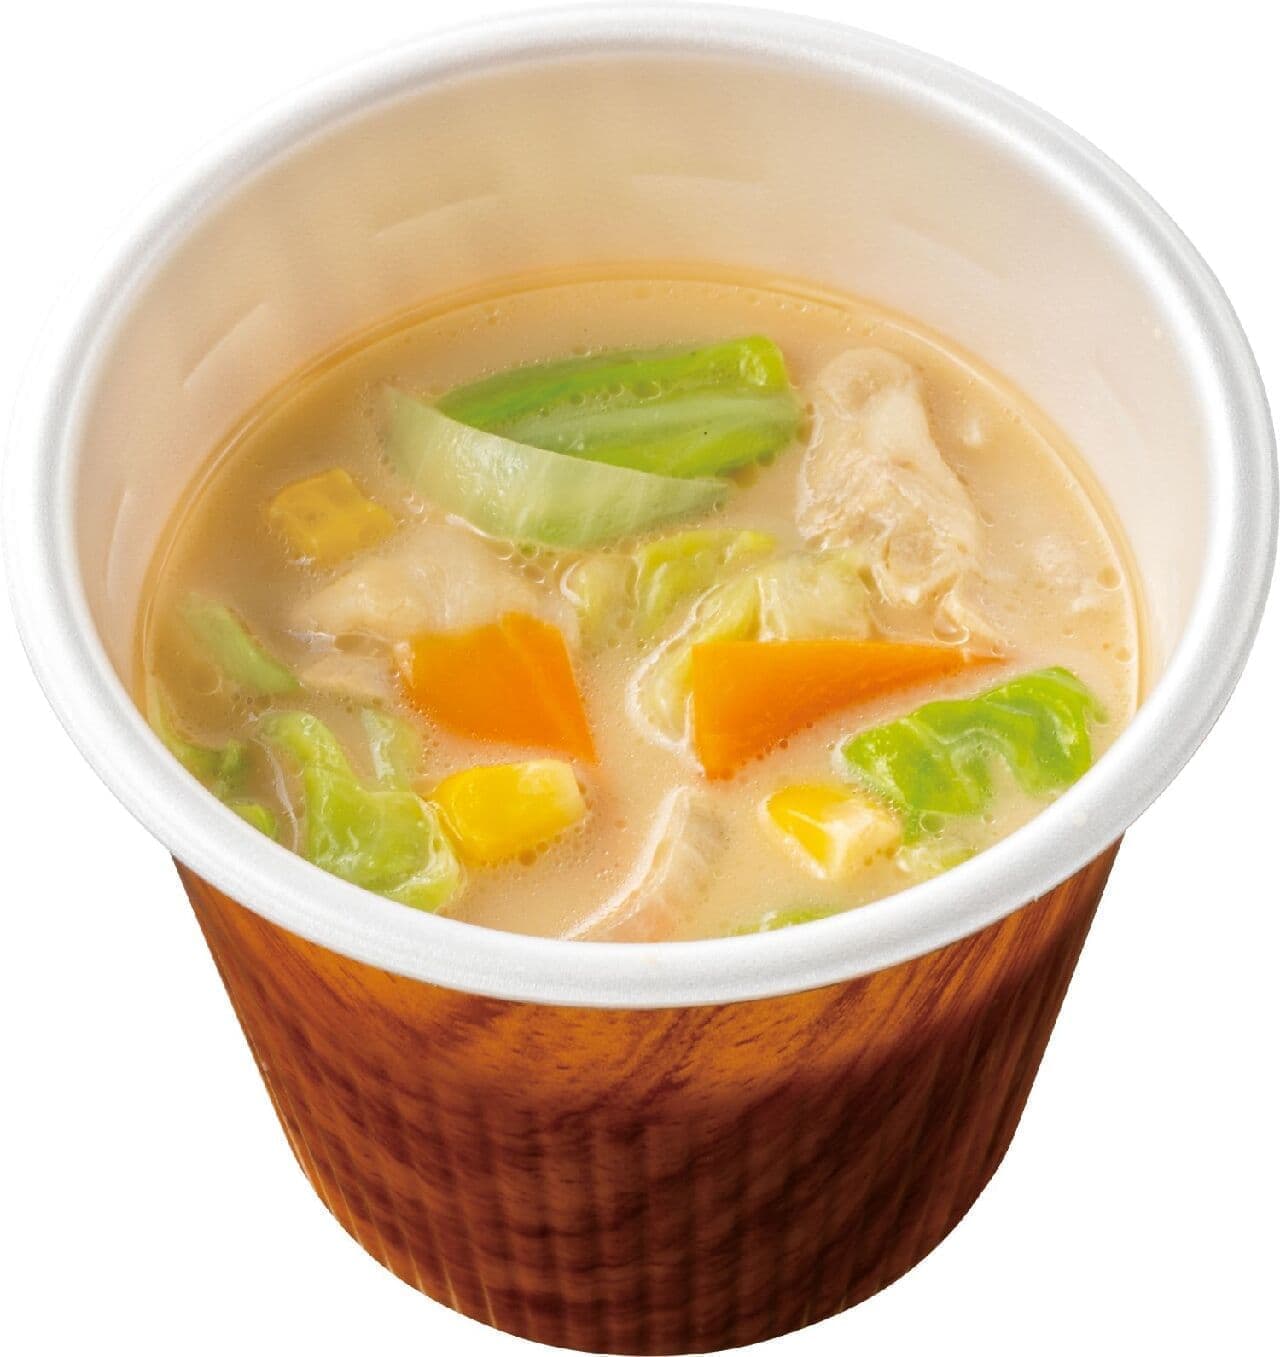 Hotto Motto "Vegetable Champon Soup (without Noodles)